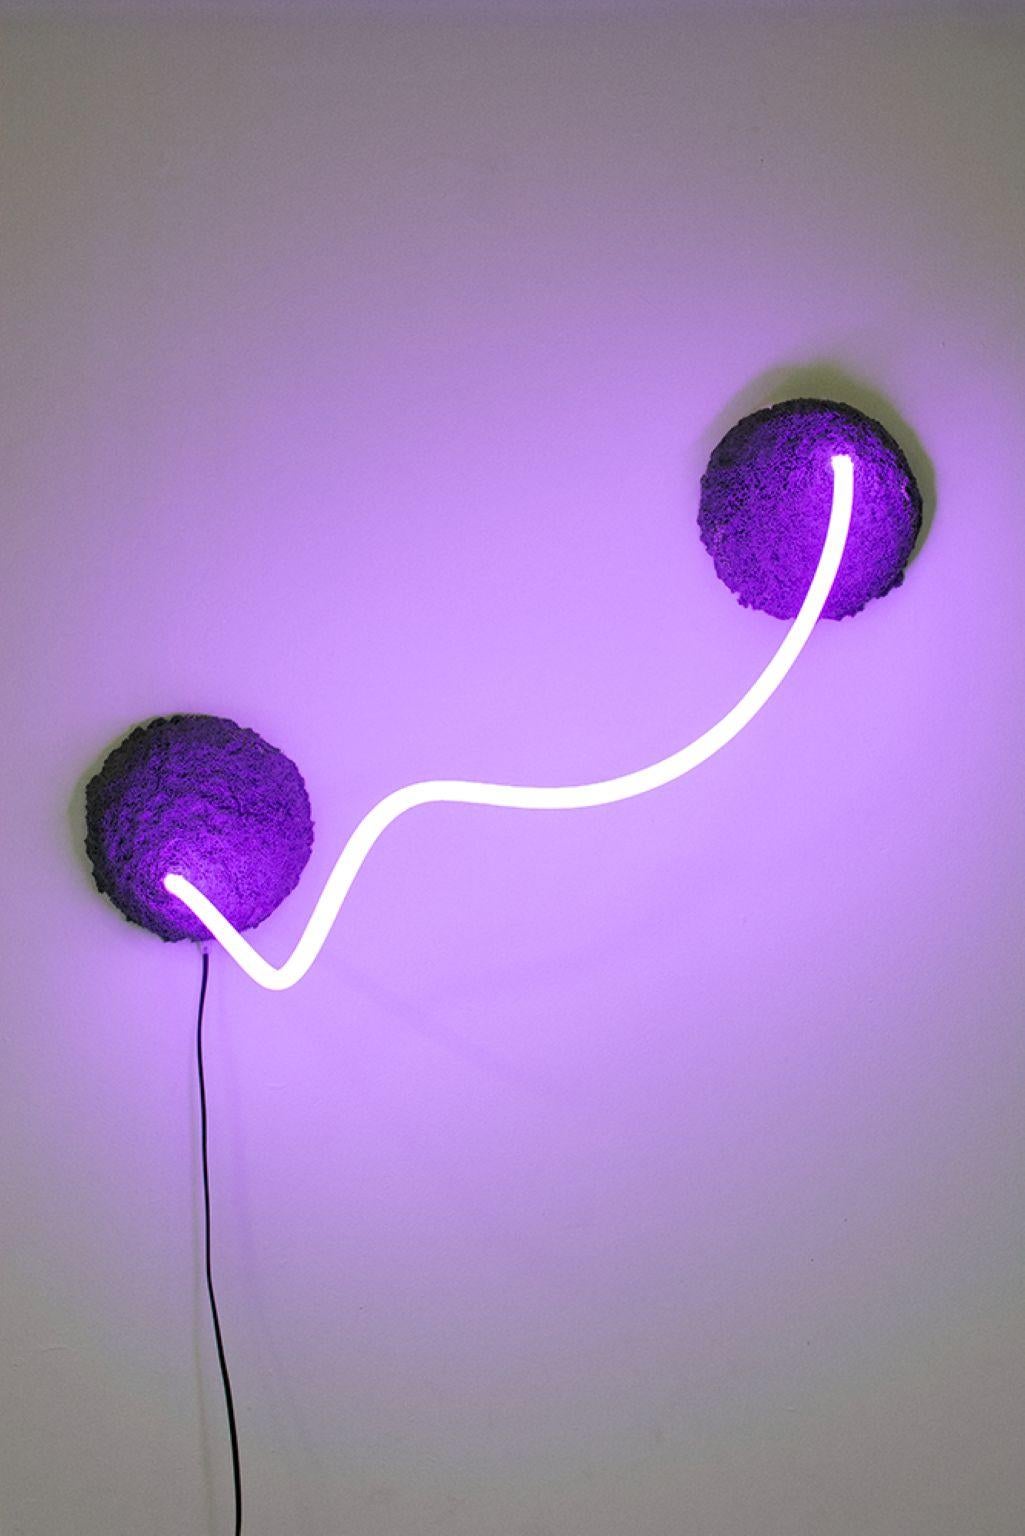 Carpet matter light n°3 by Riccardo Cenedella
Dimensions: 90 x 50 x 20 cm
Materials: Waste synthetic Carpet, White LED Neonflex, 2m electric wire
Variations of LED Neonflex color available. 
All our lamps can be wired according to each country.